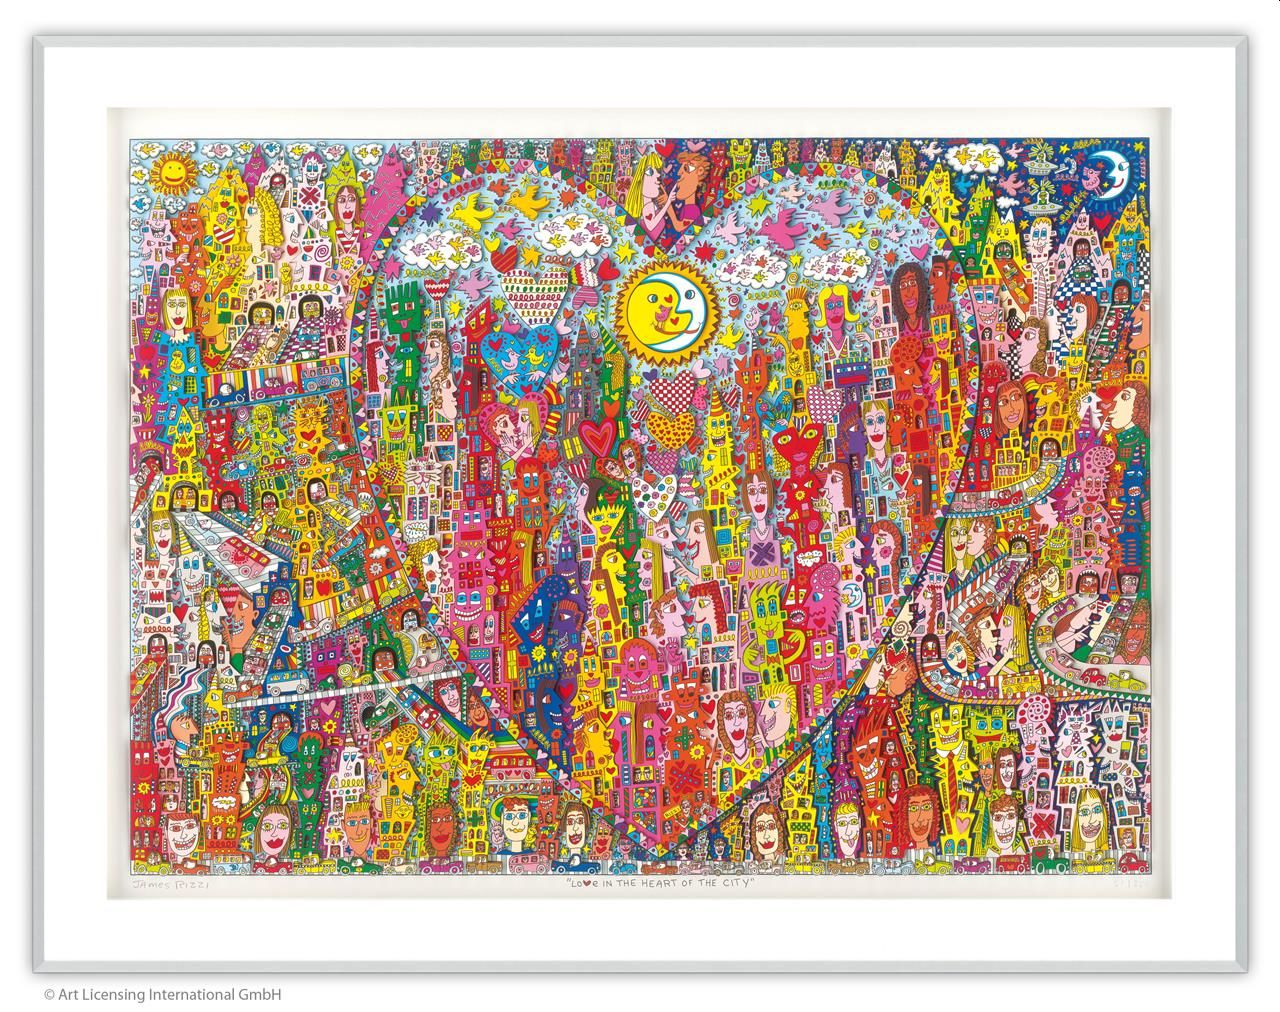 James Rizzi - LOVE IN THE HEART OF THE CITY 